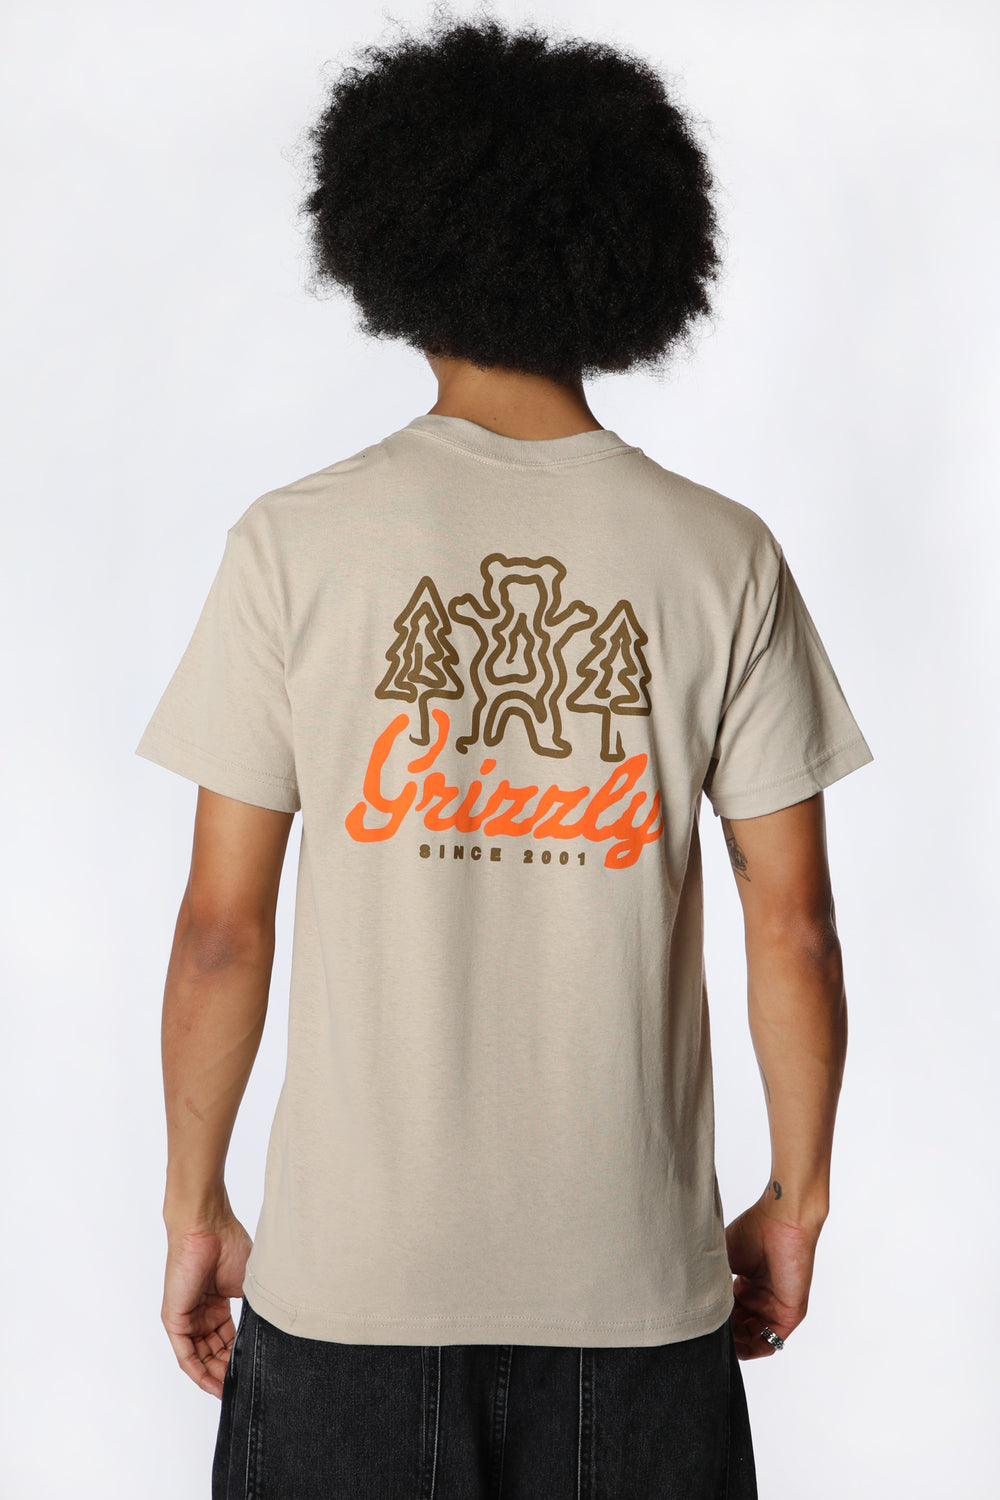 T-Shirt Windy Creek Grizzly Sable